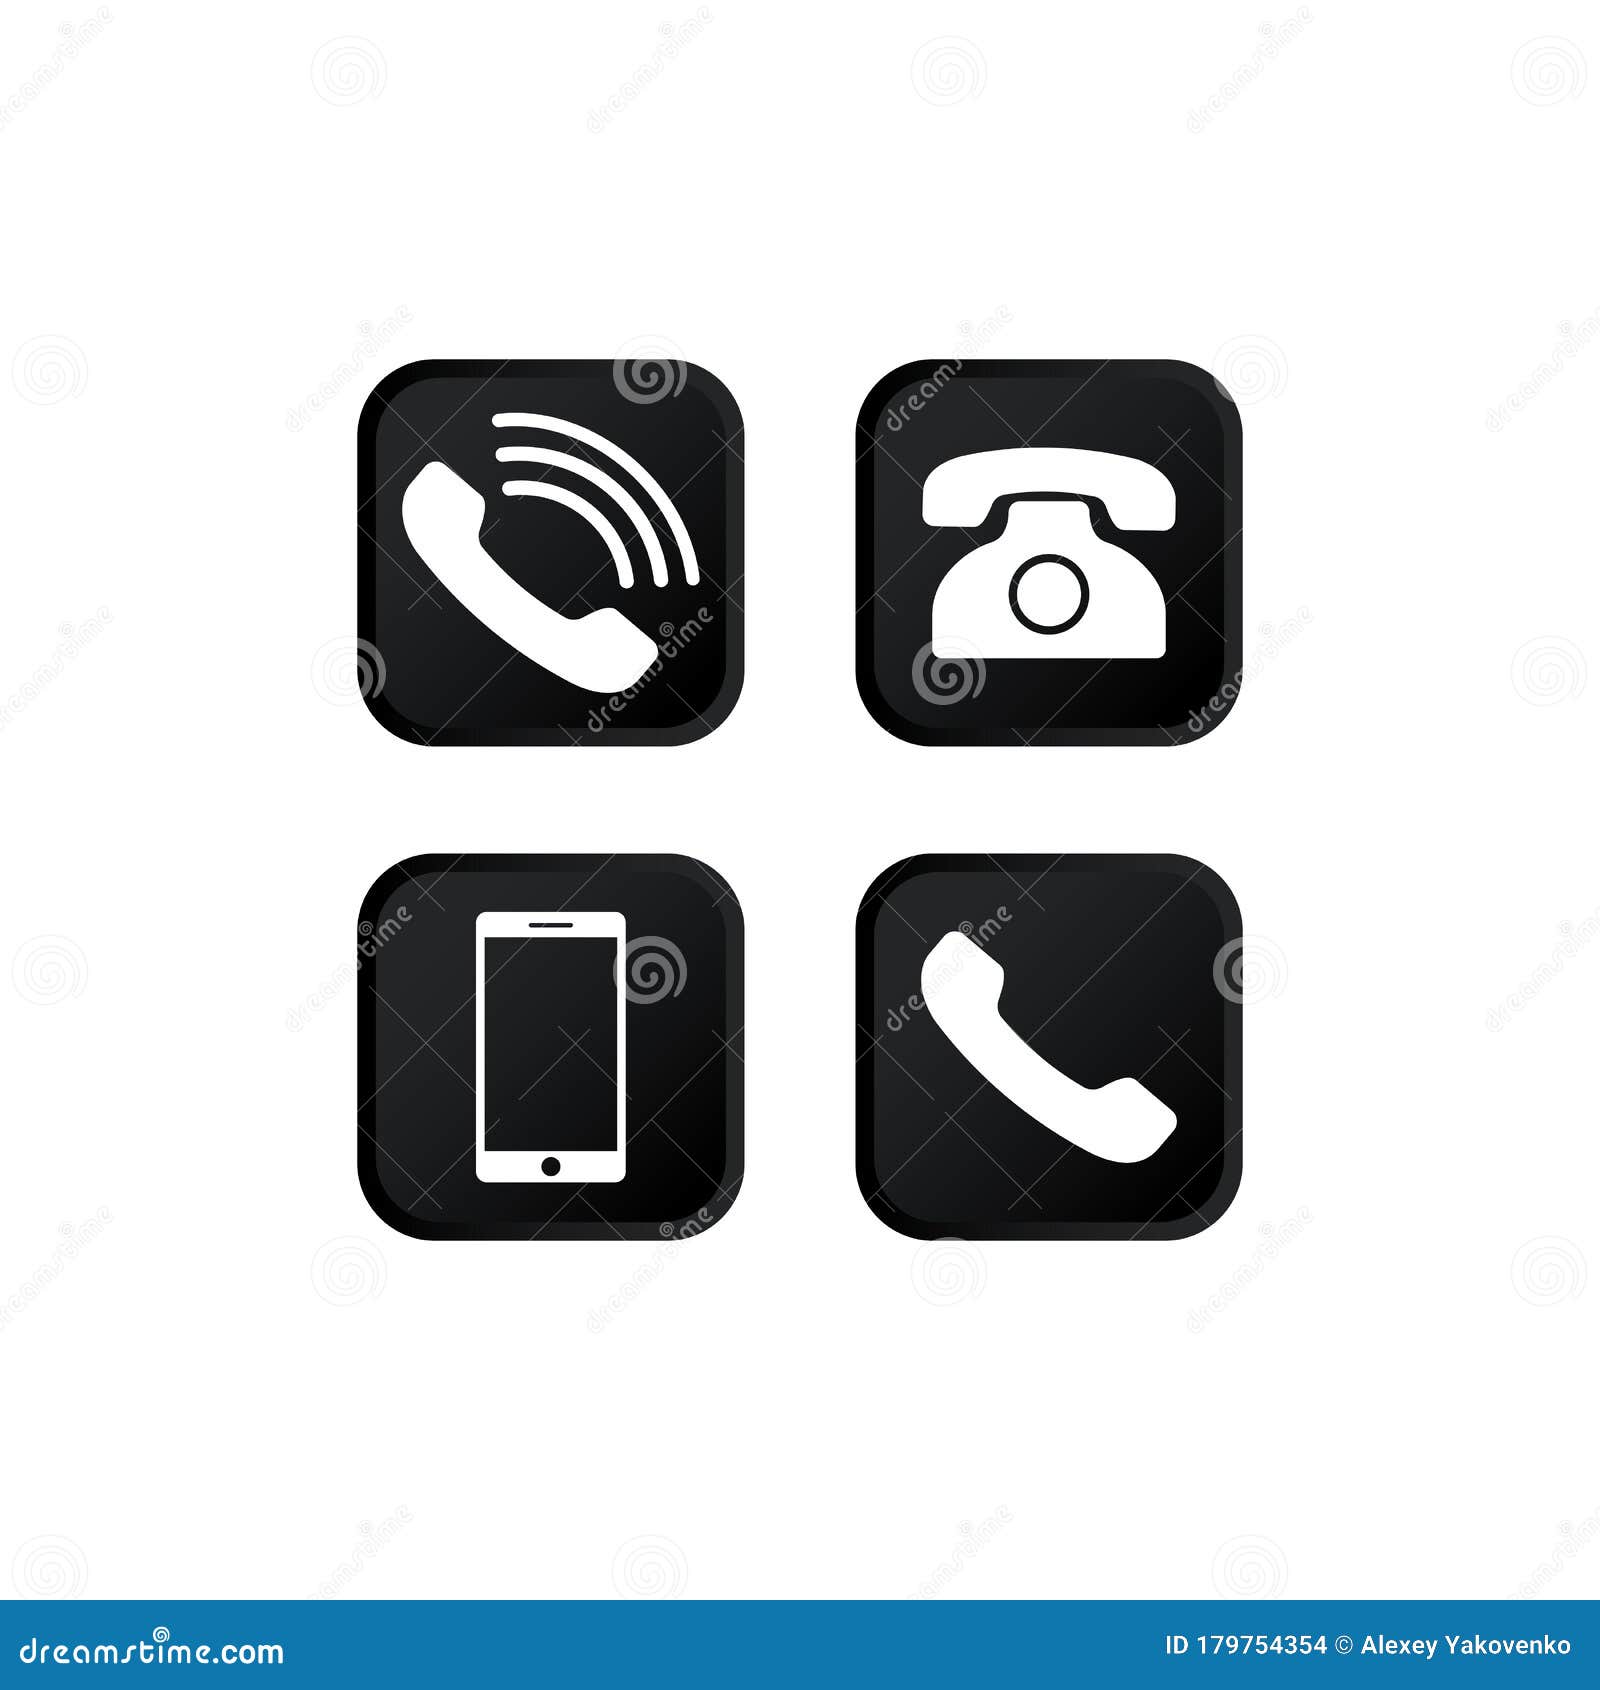 set of communication icons set. phone, smartphone, mobile phone icon set modern button for web or appstore  black 